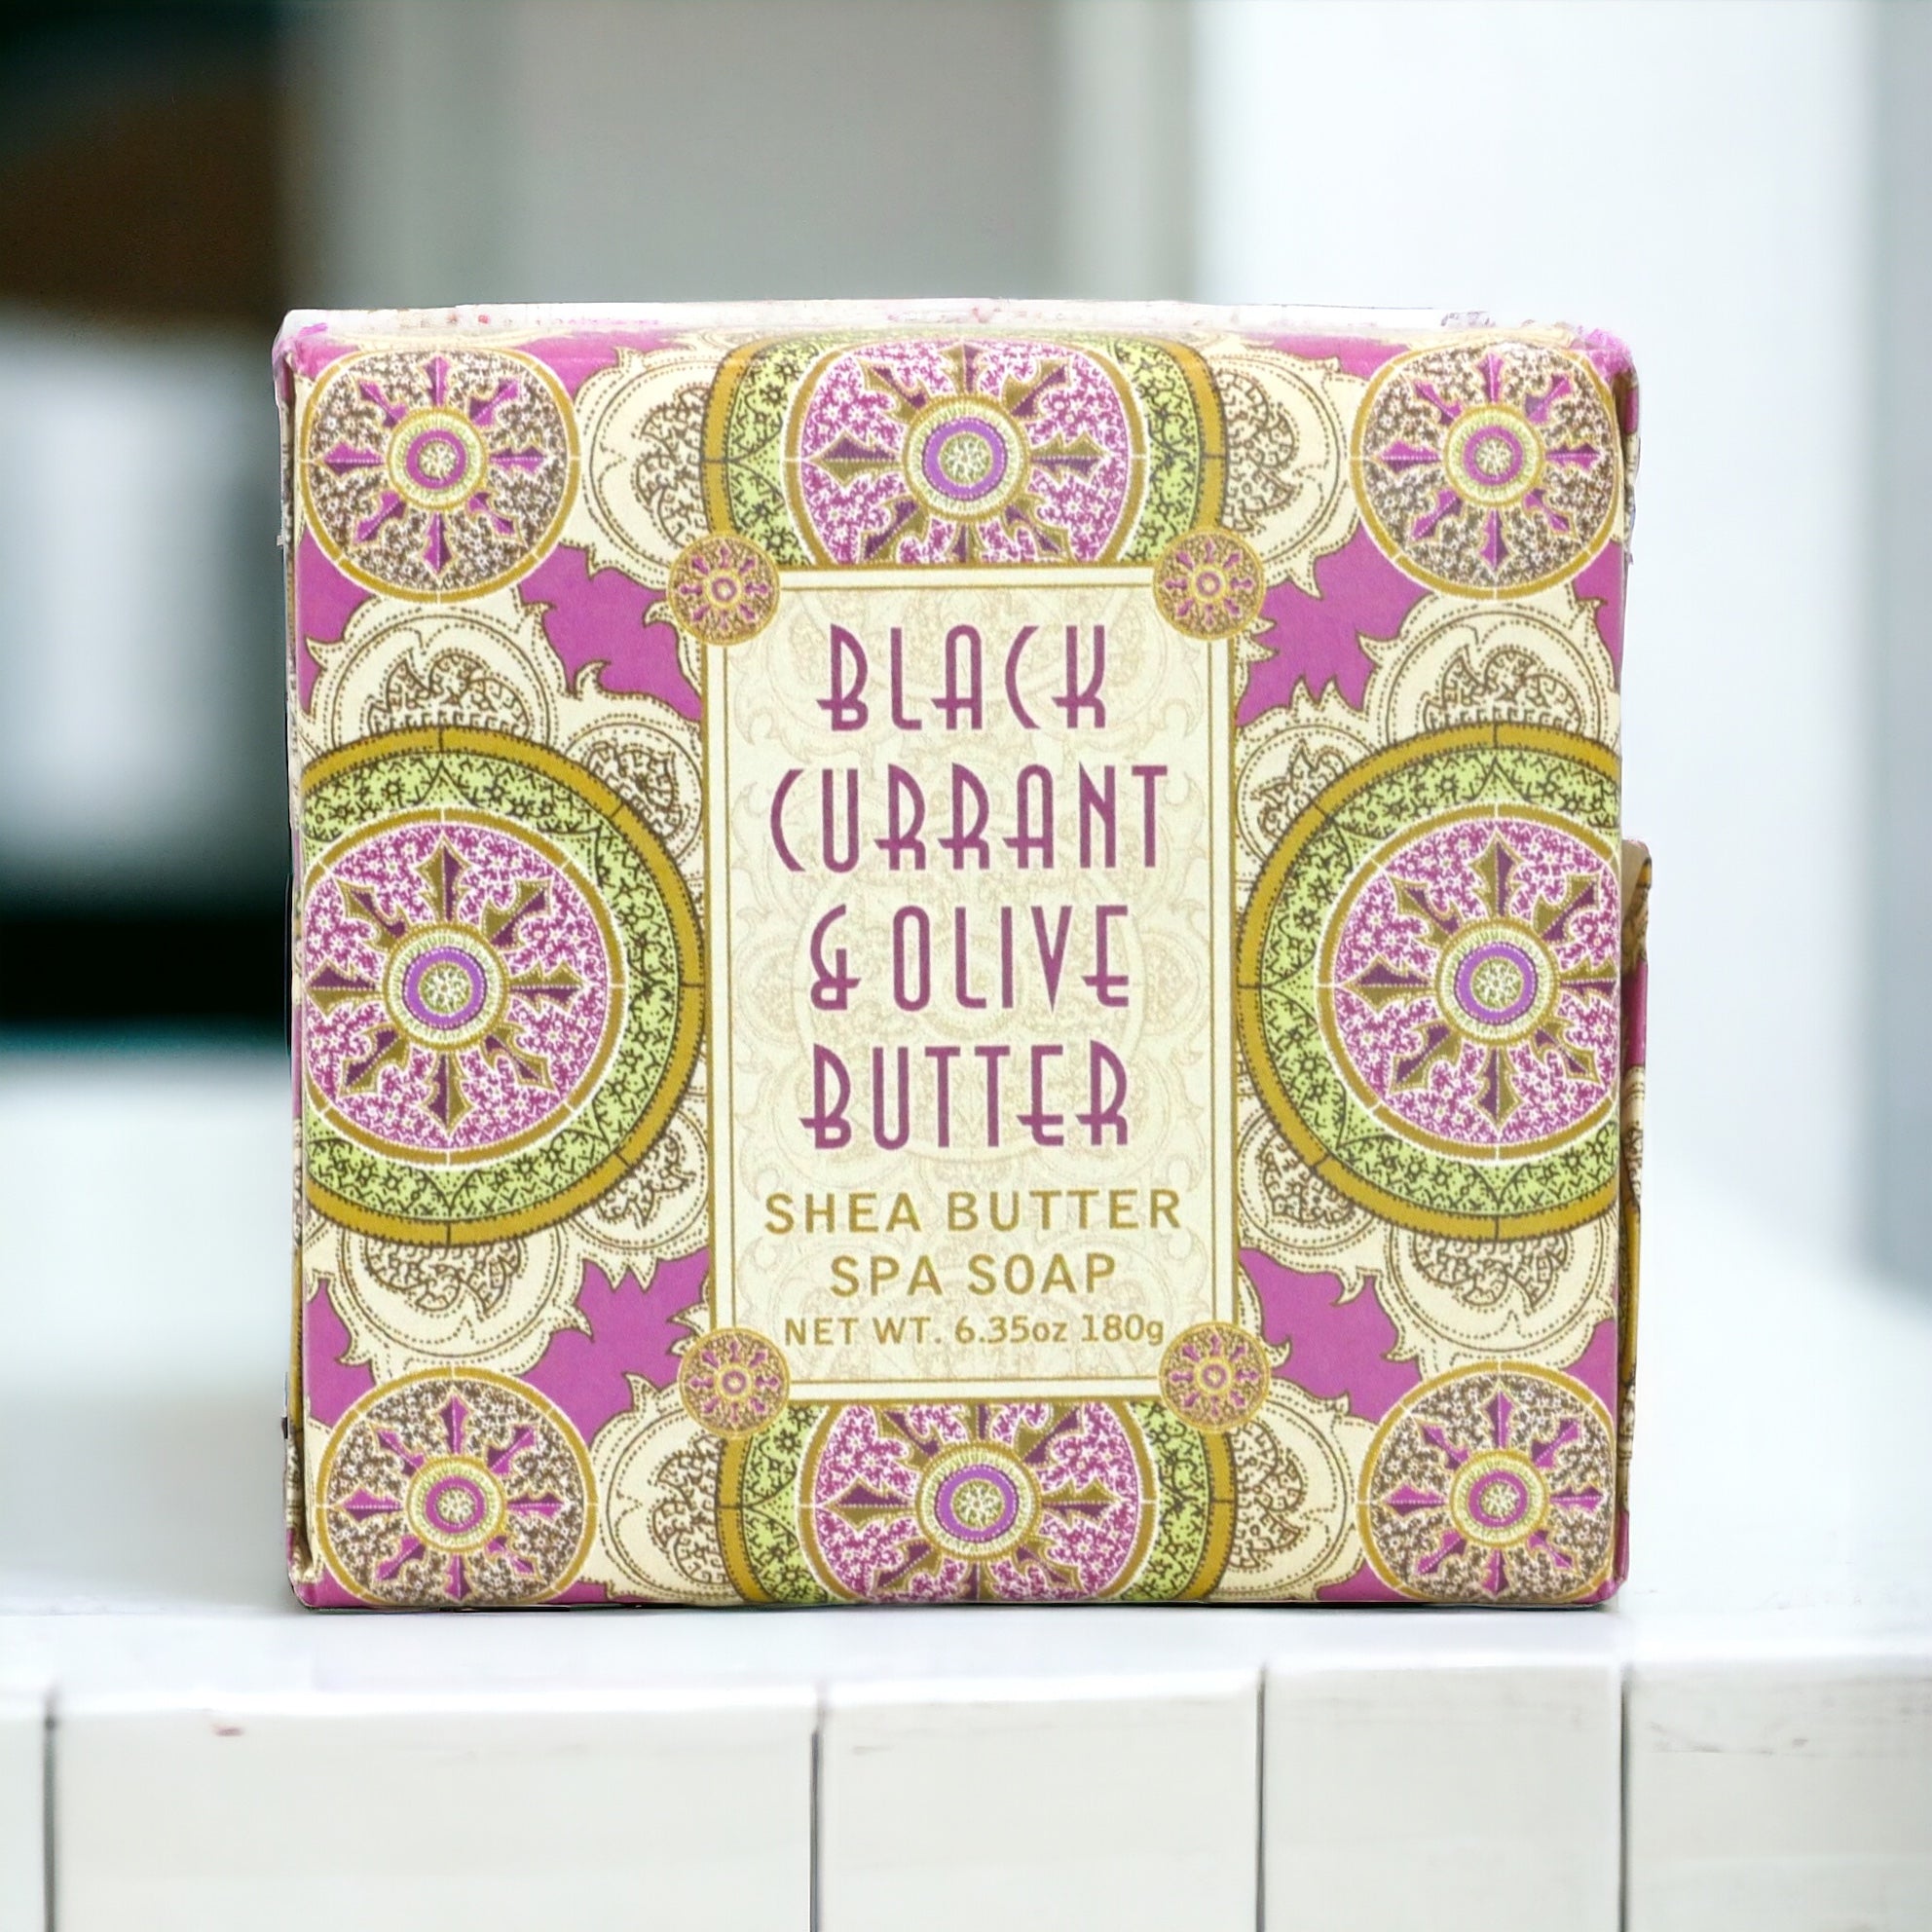 Black Currant & Olive Butter Shea Butter Spa Soap by Greenwich Bay Trading Co.